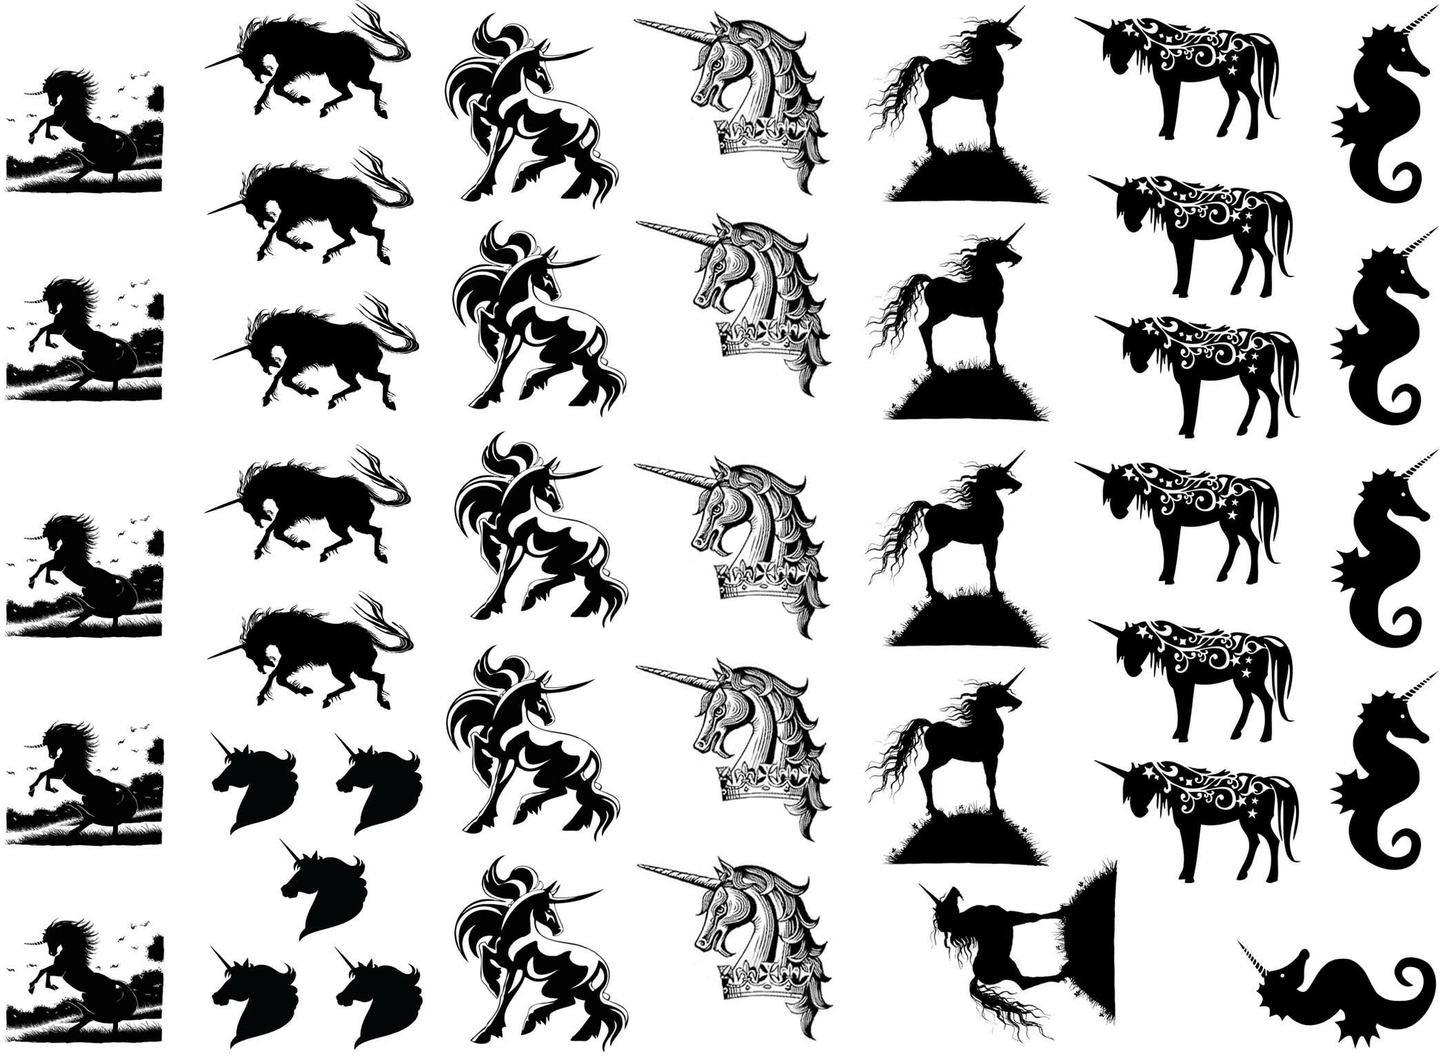 Unicorn Variety 41 pcs 1/2" to 1"  Black Fused Glass Decals